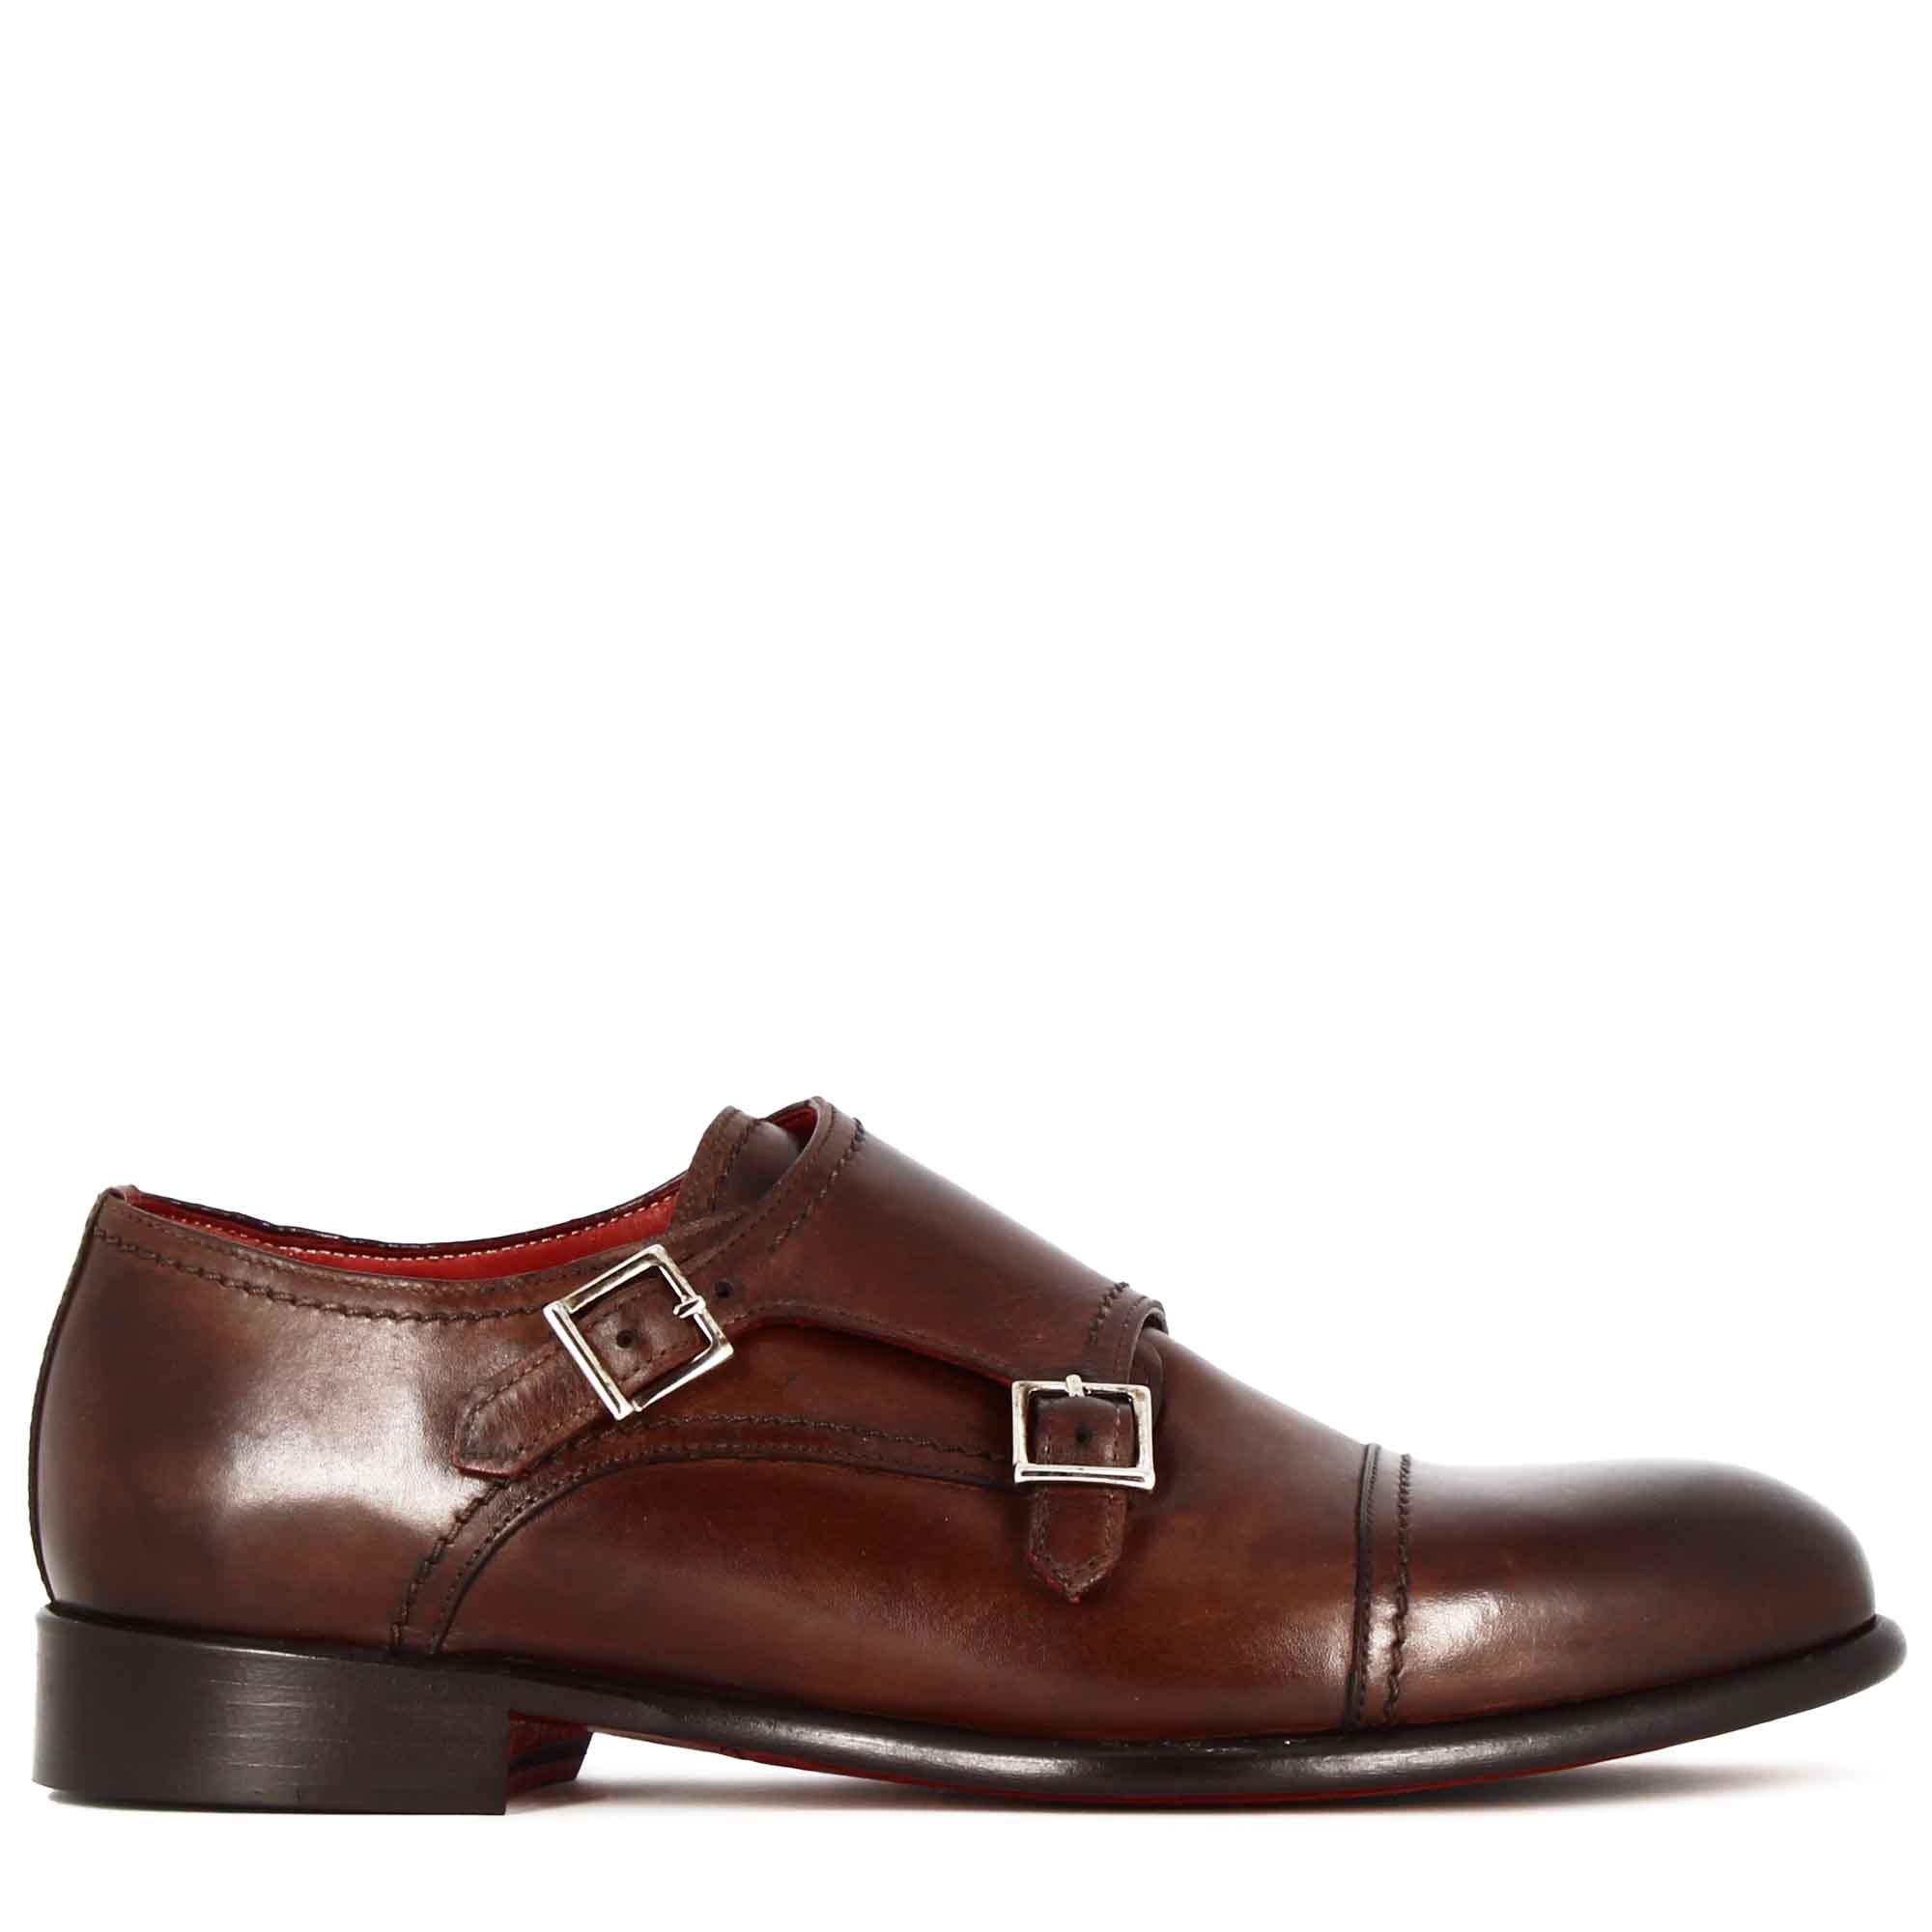 Italian shoe with double buckle for men